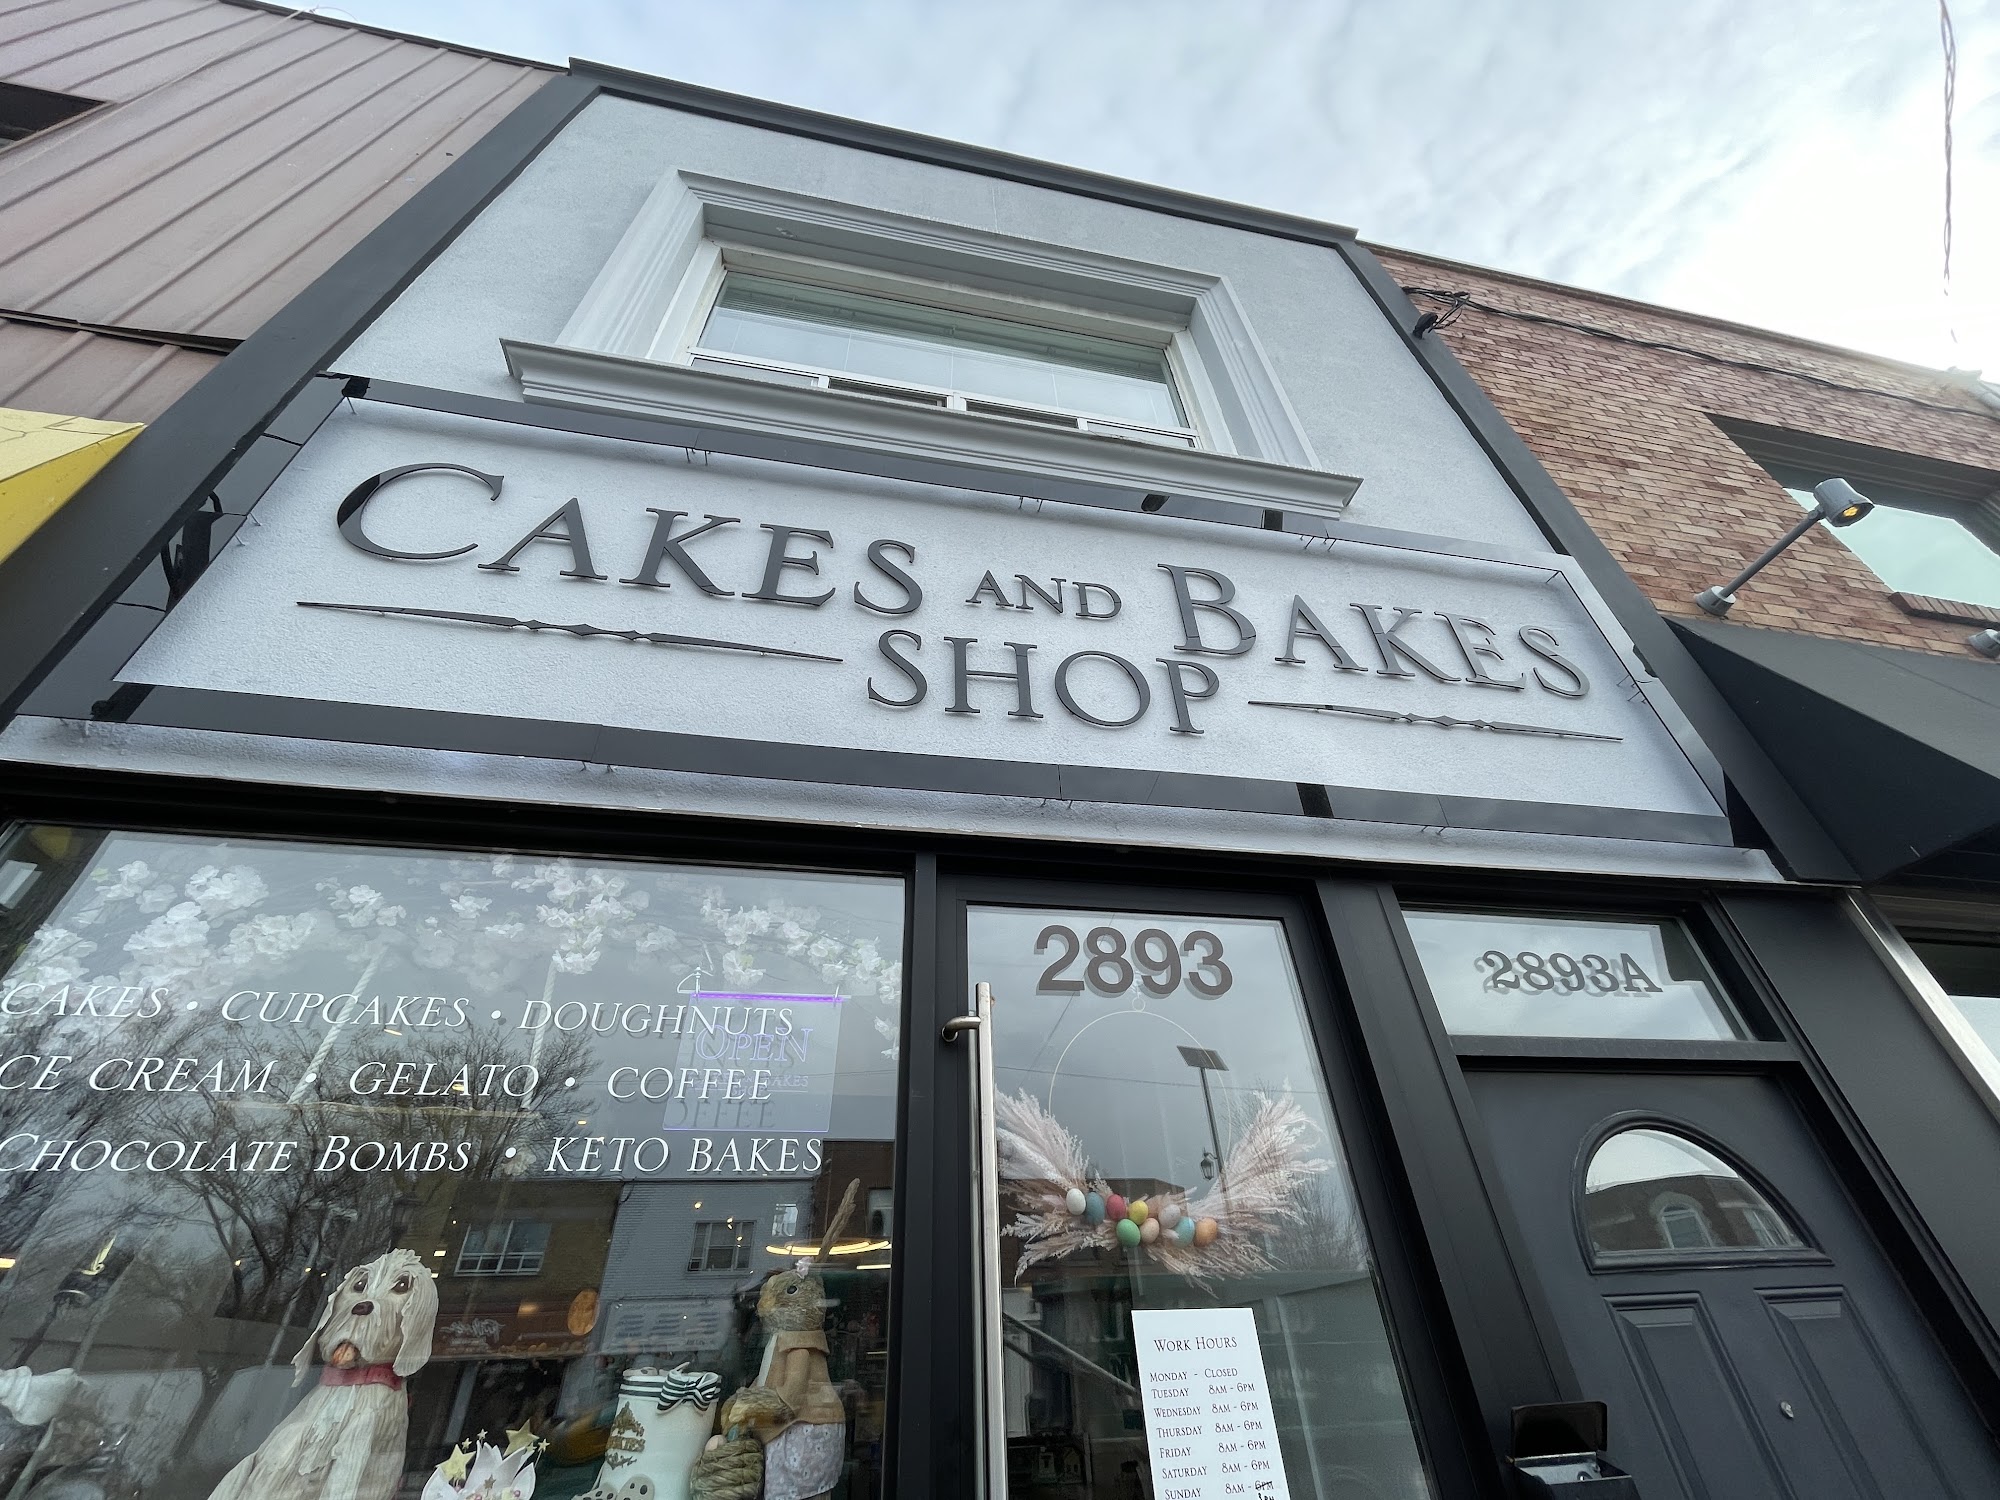 Cakes and Bakes Shop